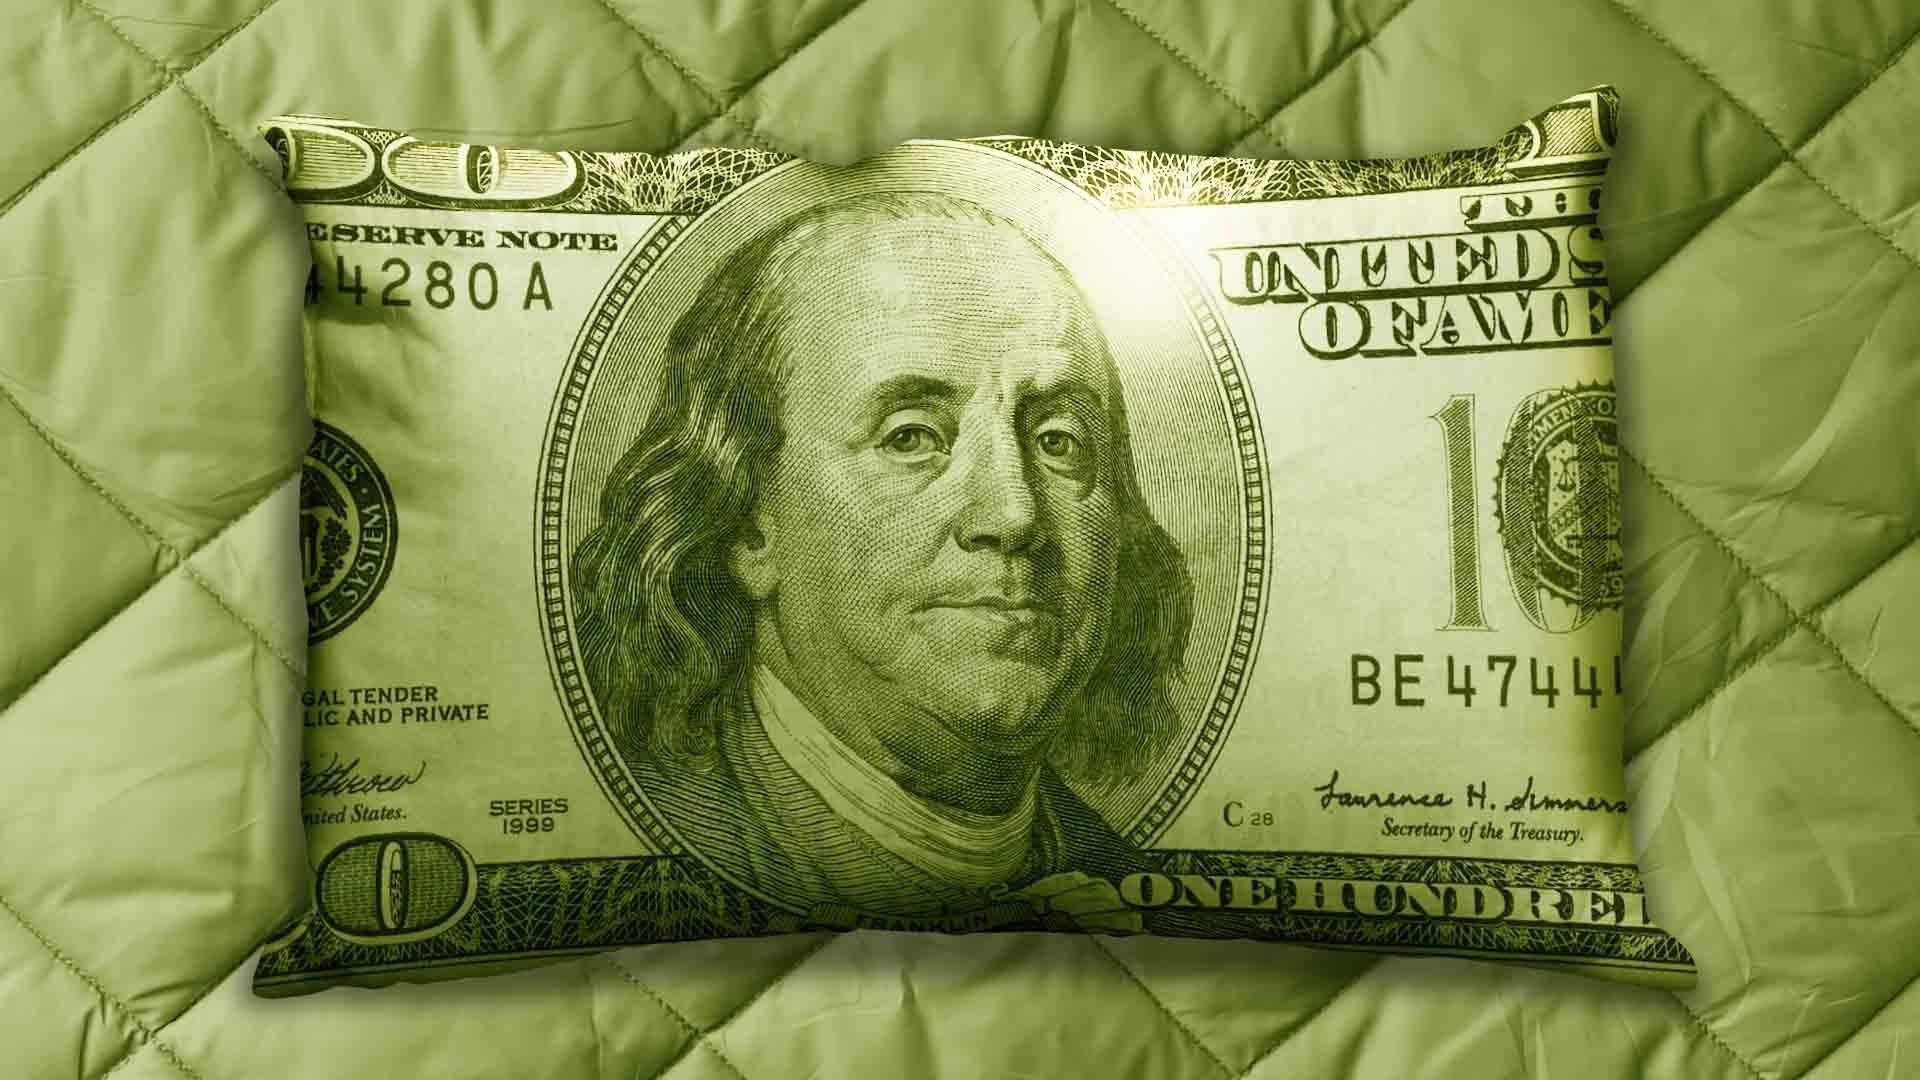 Illustration of a pillow in the shape of a hundred dollar bill on a bedspread